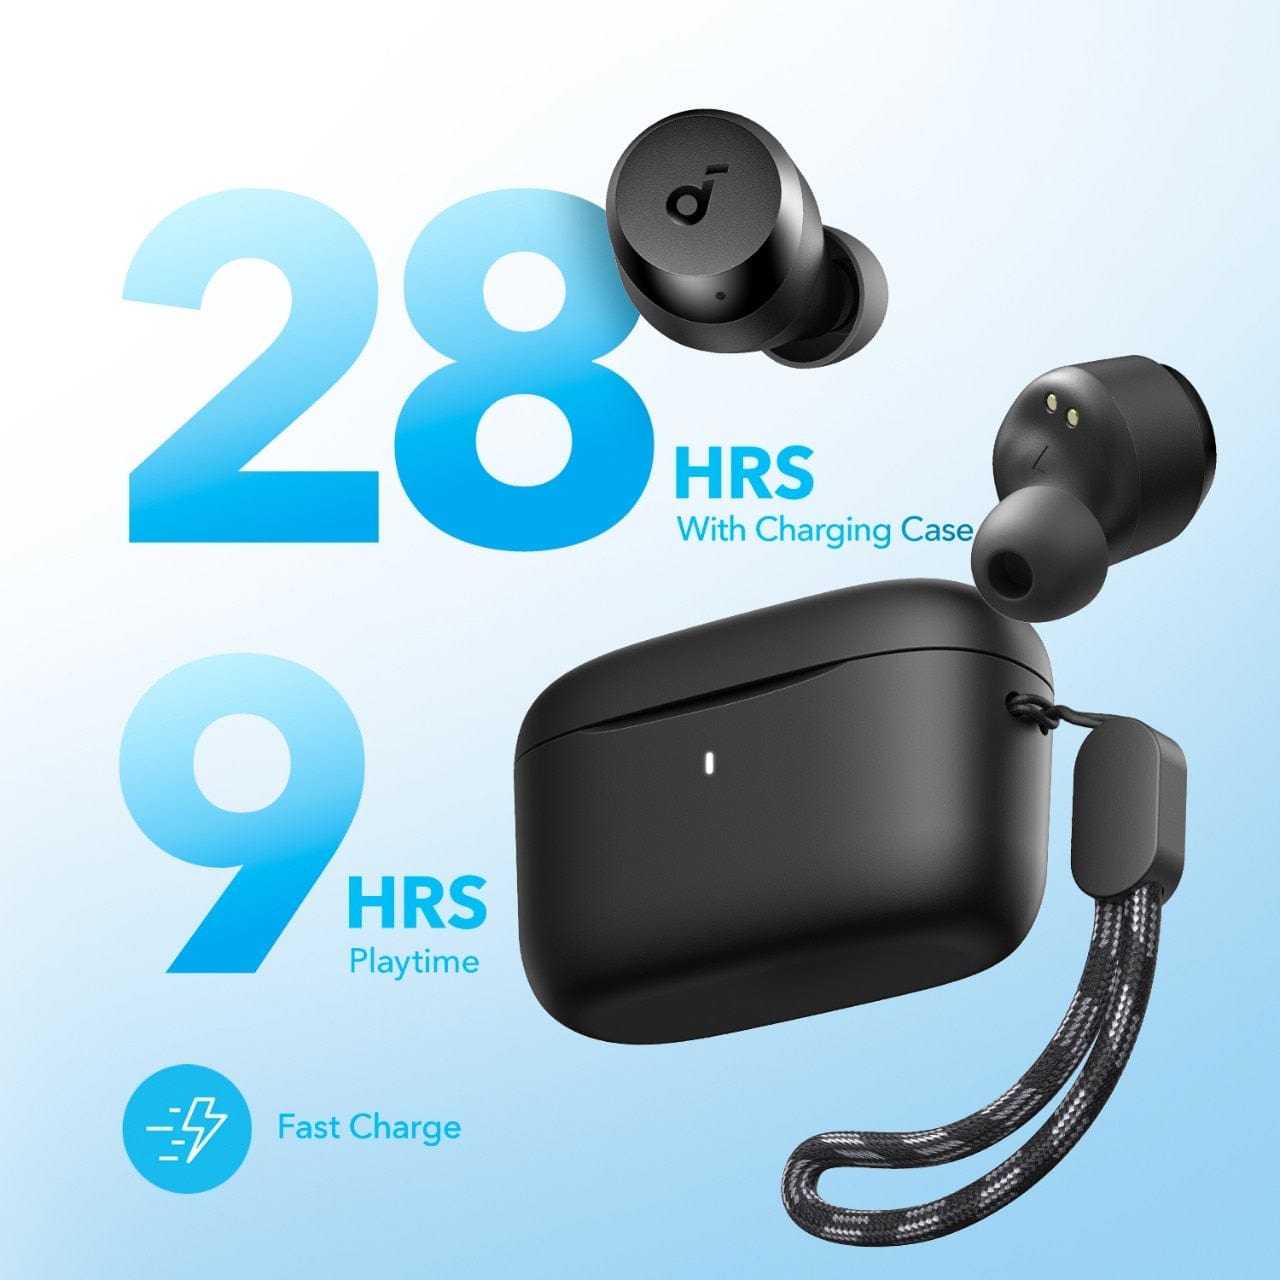 Soundcore Soundcore, Wireless Earbuds, Version A20i, Supports Bluetooth 5.3, Playtime up to 28 Hours, Color White